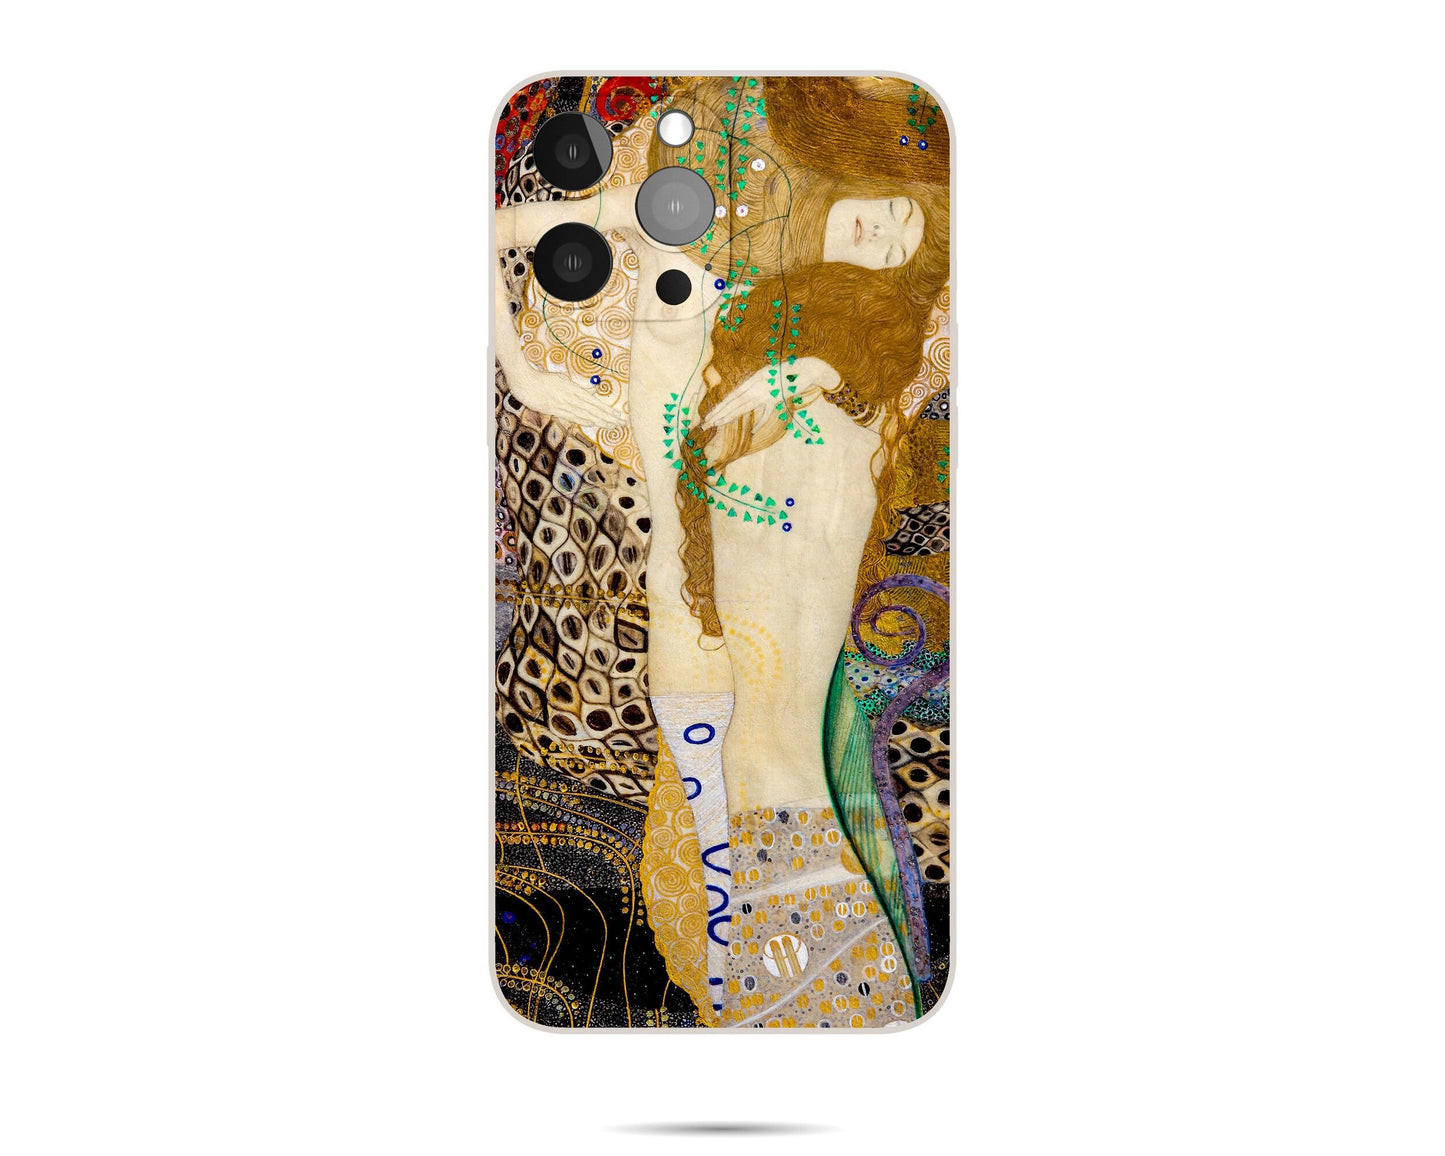 Iphone Case Of Gustav Klimt Painting Friends (Water Serpants) Iphone 14 Cover, Iphone 12 Case, Iphone Xr, Aesthetic Phone Case, Gift For Her